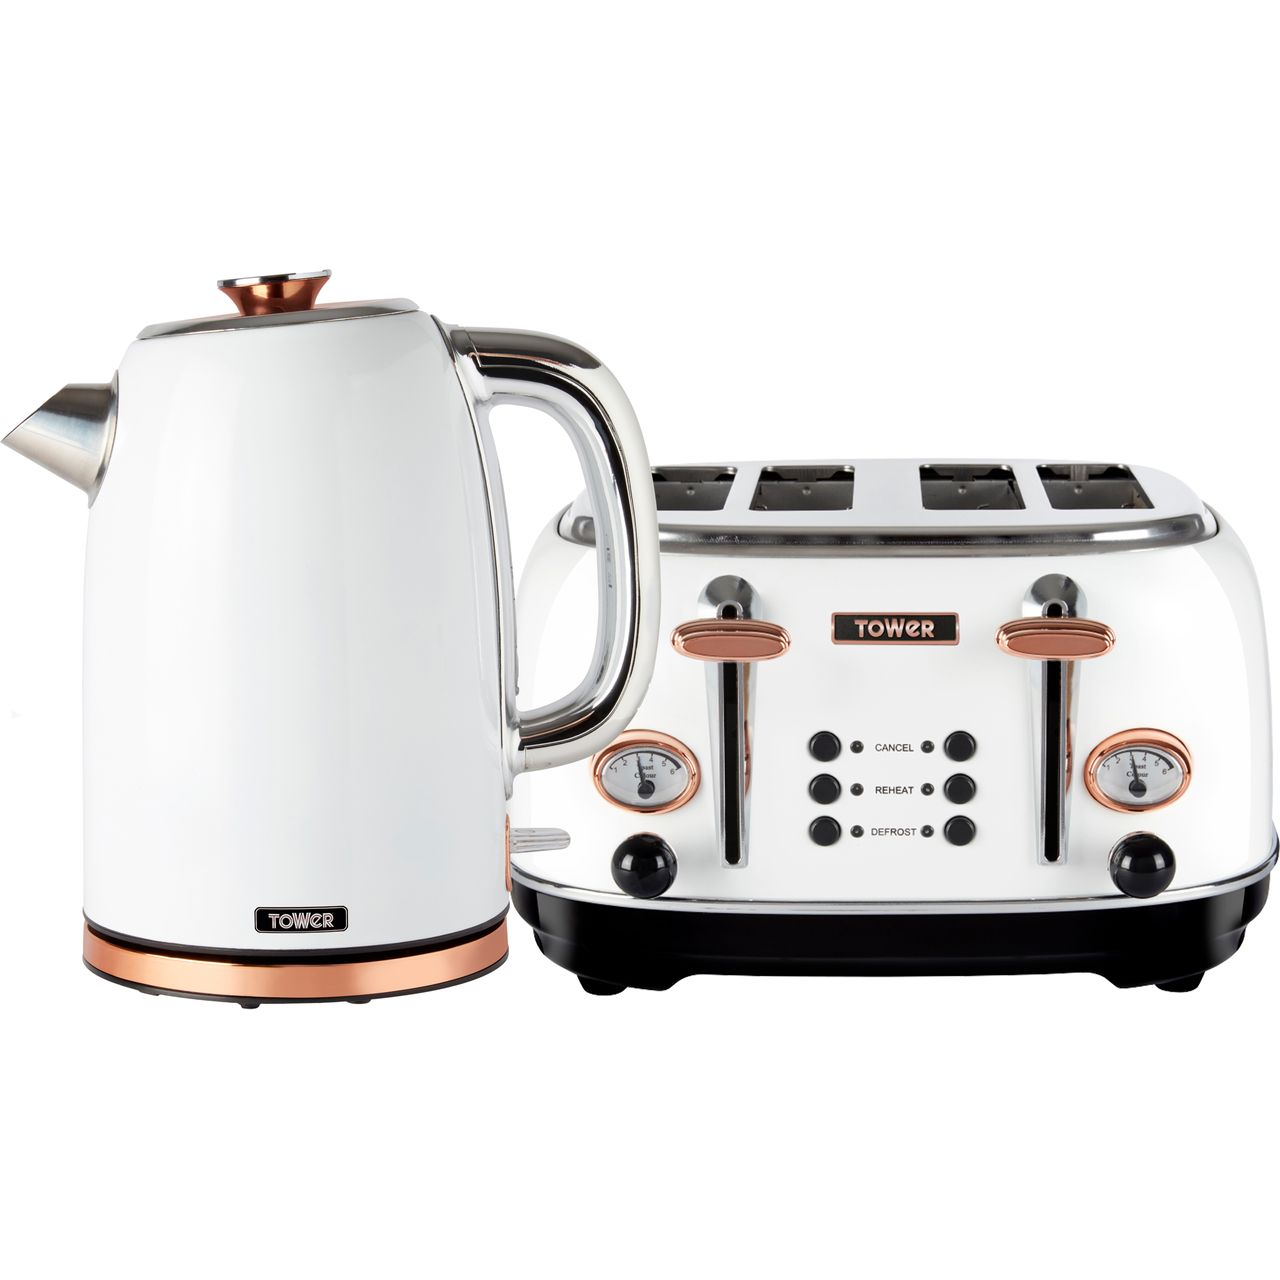 Tower AOBUNDLE003 Kettle And Toaster Sets Review